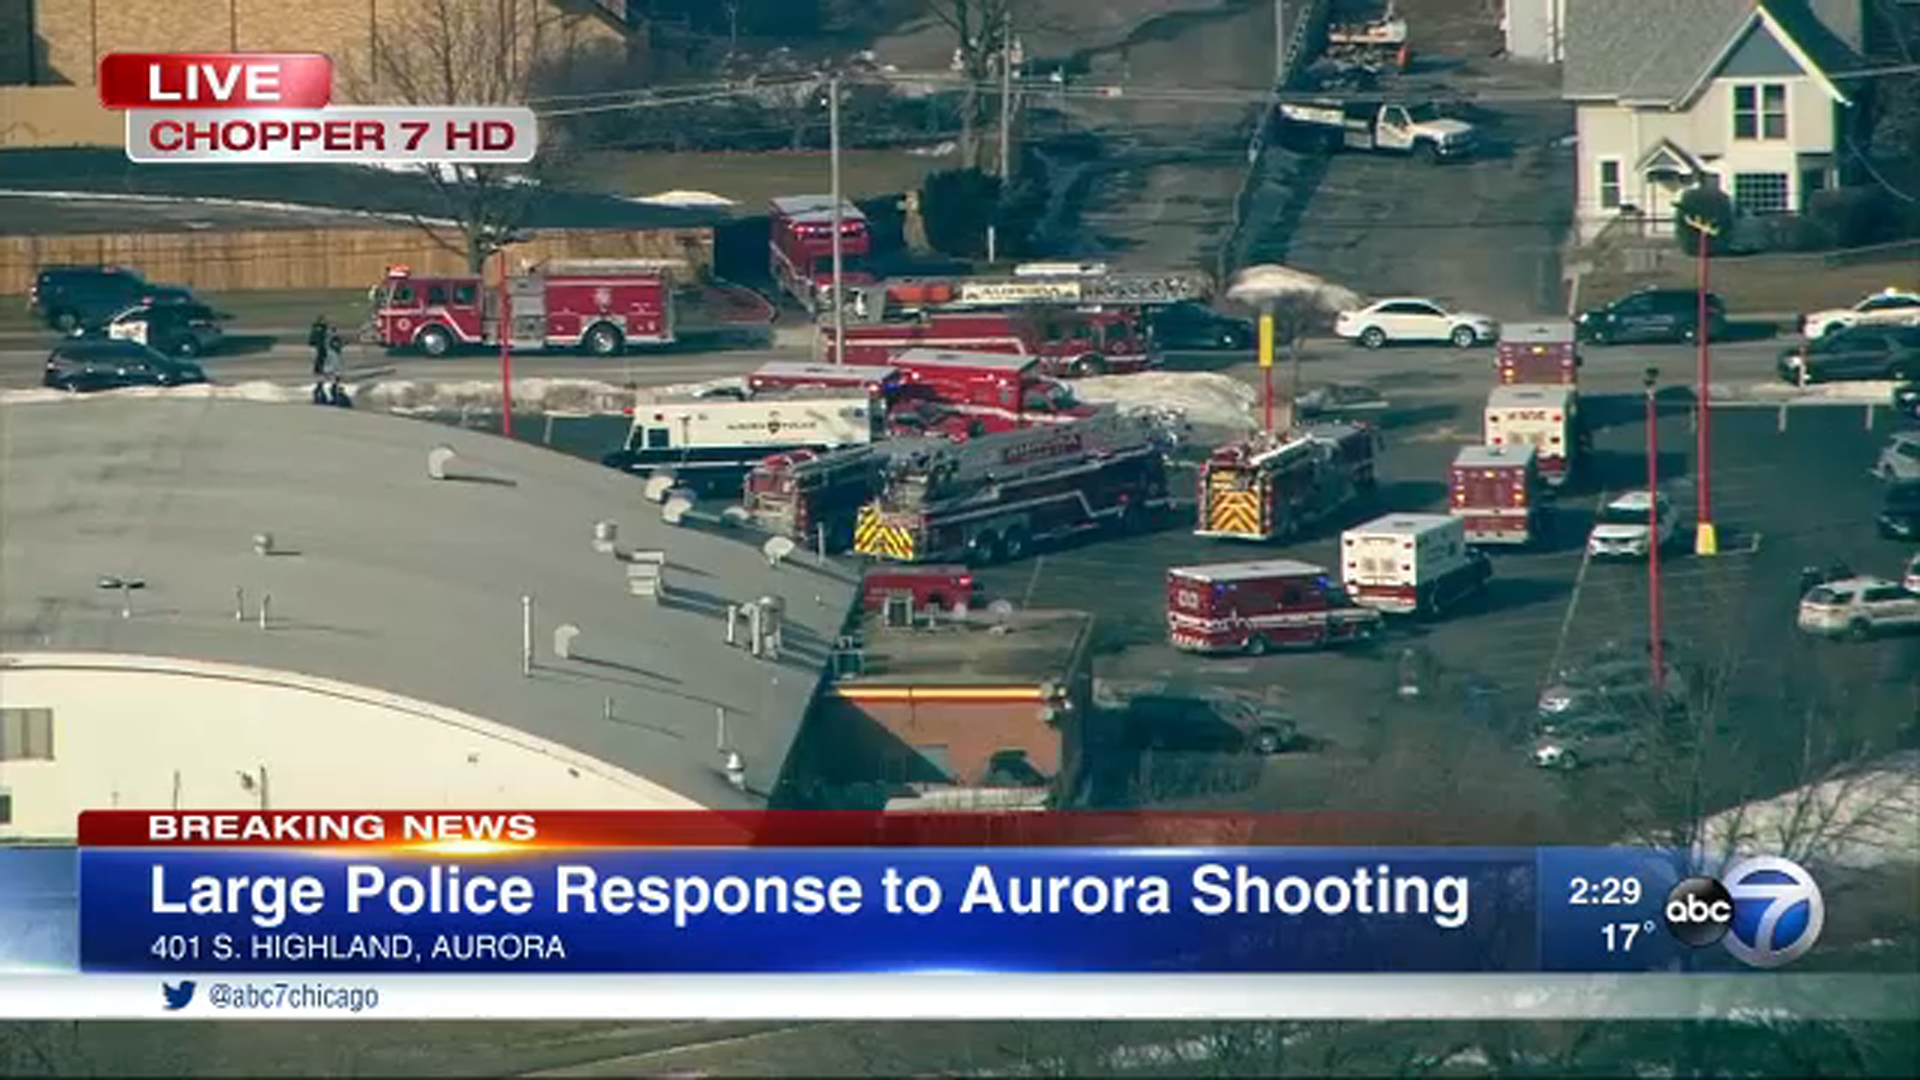 WATCH LIVE: Aurora shooting leaves multiple wounded, large police presence reported at ...1920 x 1080